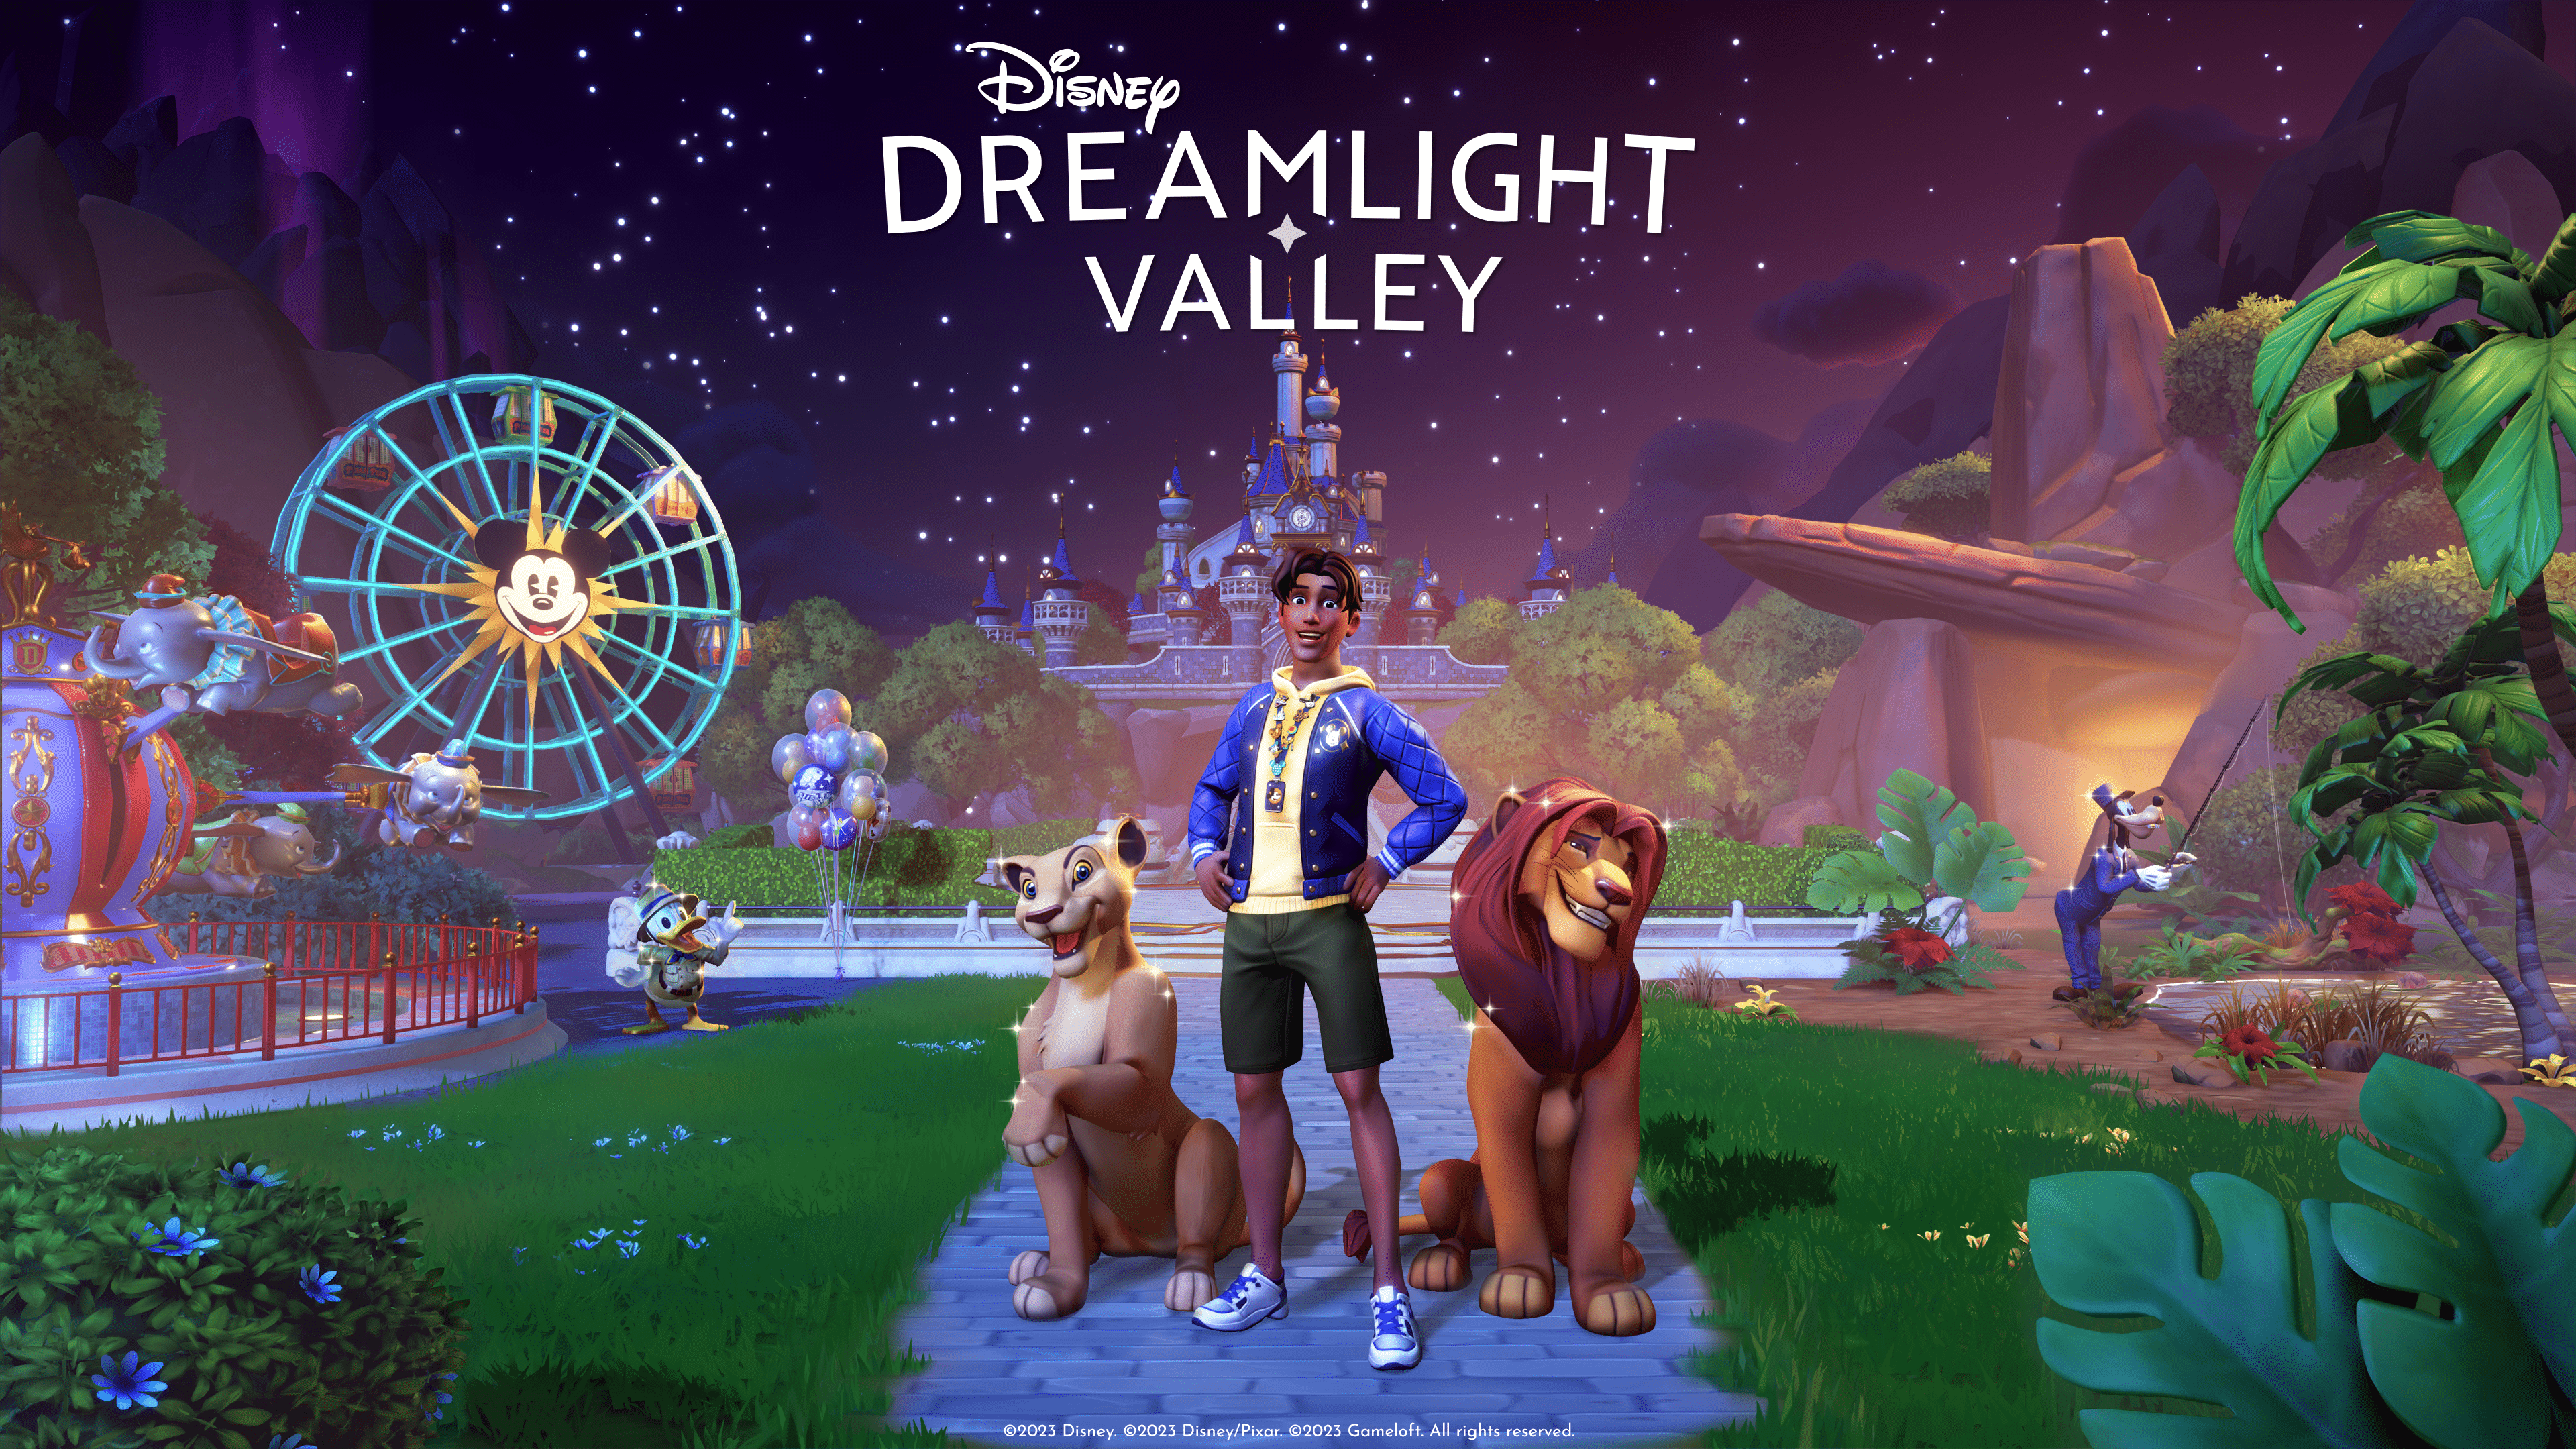 Disney Dreamlight Valley 'Pride of the Valley' update now